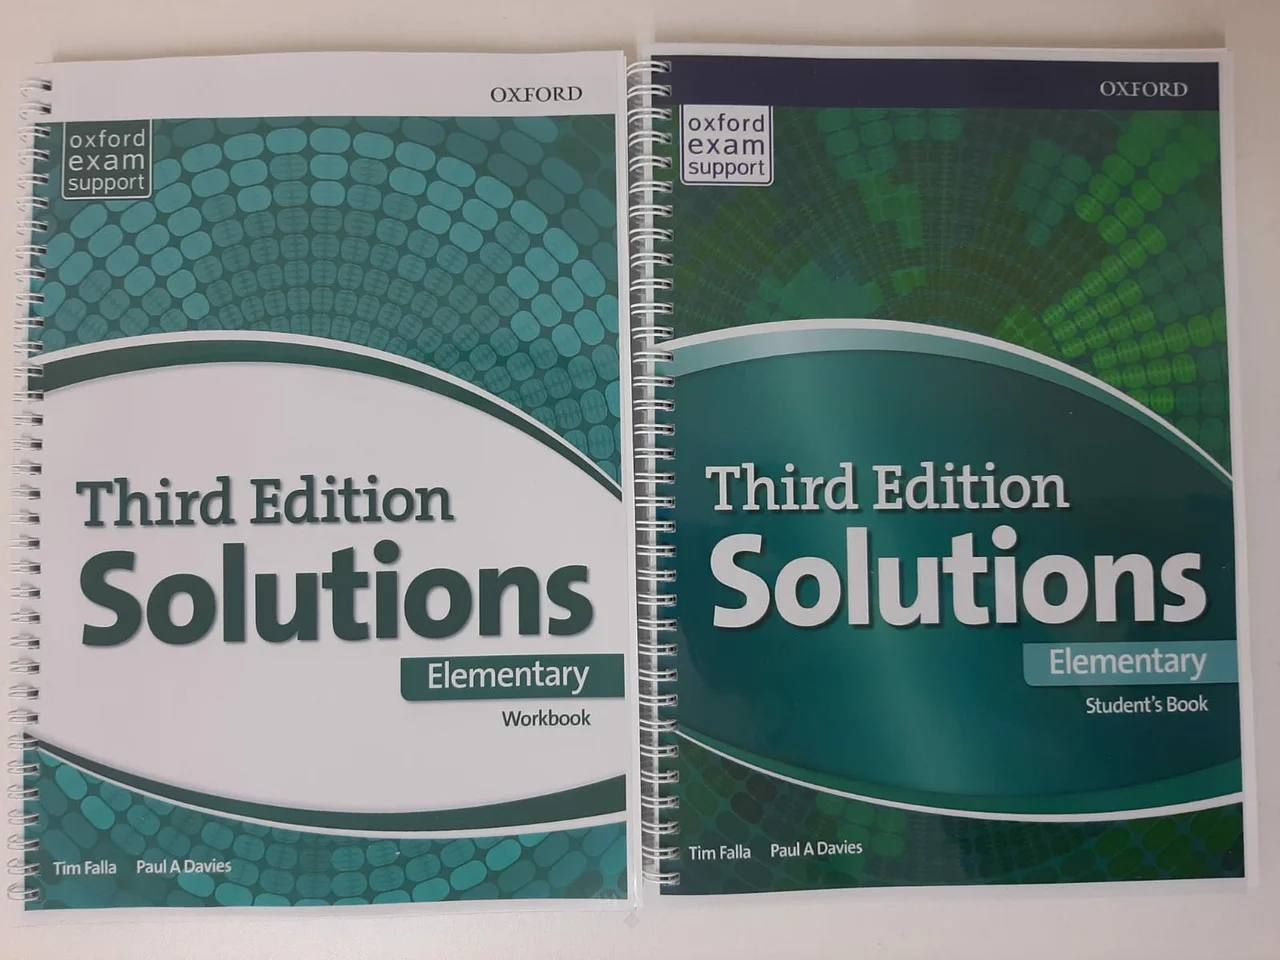 Solutions Elementary 3rd Edition. Solutions: Elementary. Solutions third Edition Elementary Tests. Solutions elementary 3rd students book